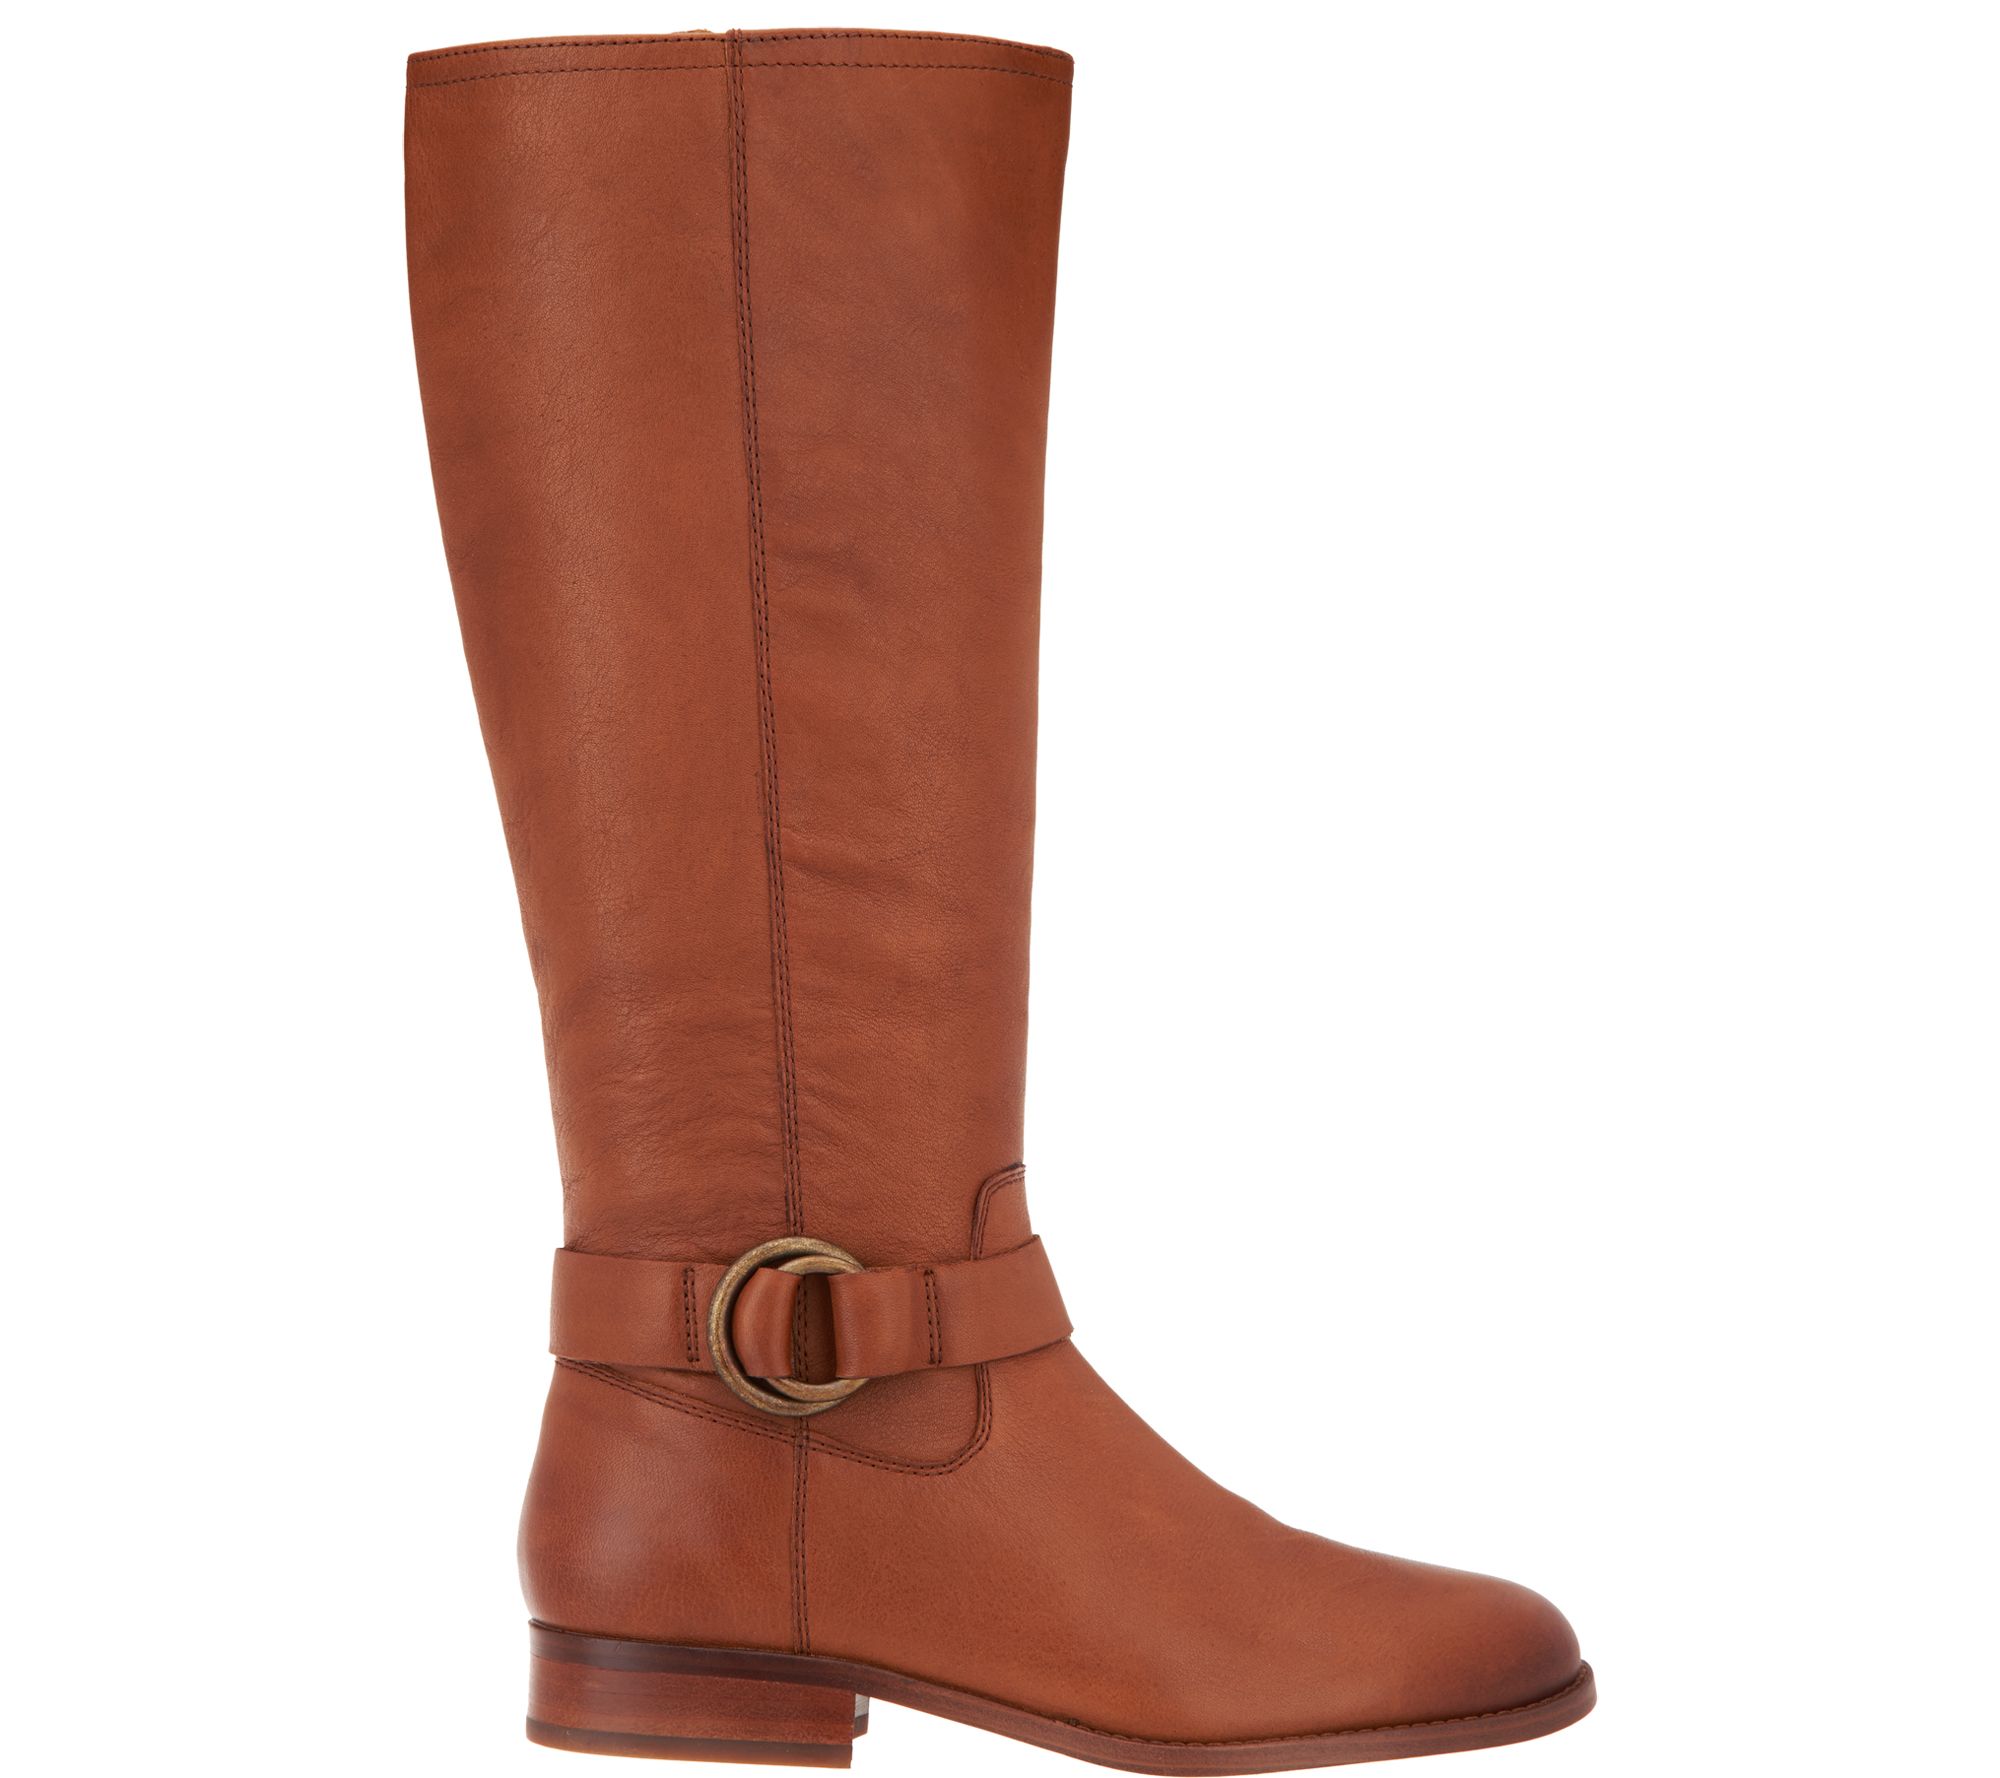 frye & co. Medium Calf Leather Side Zip Tall Boots - Adelaide - QVC.com